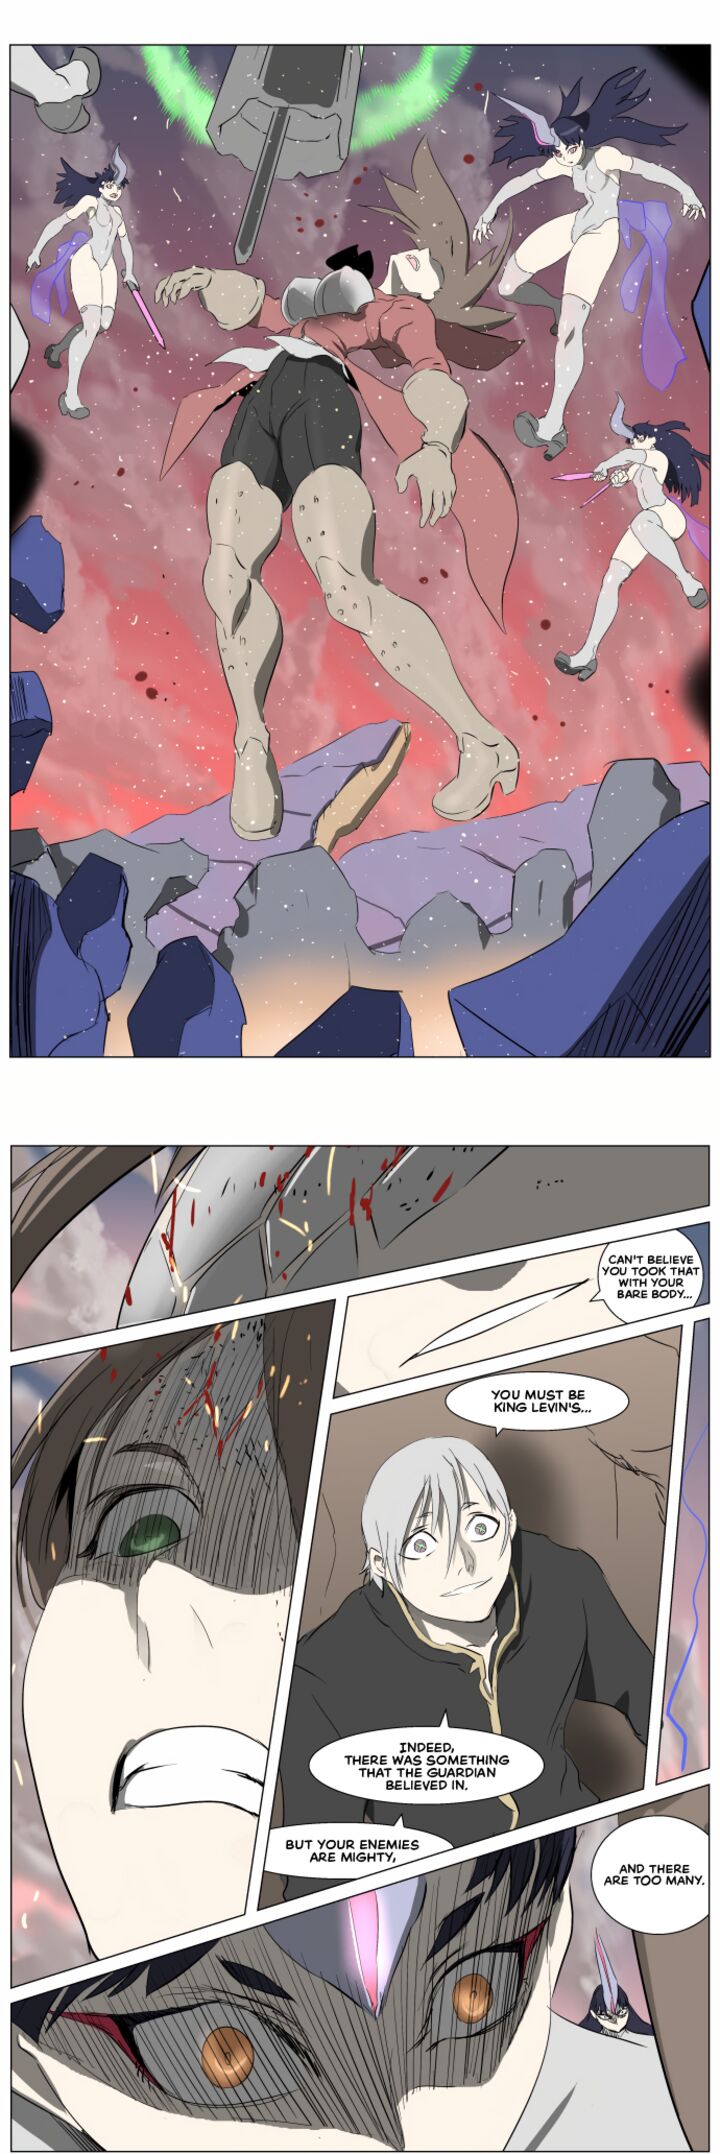 Knight Run Chapter 252 Page 3